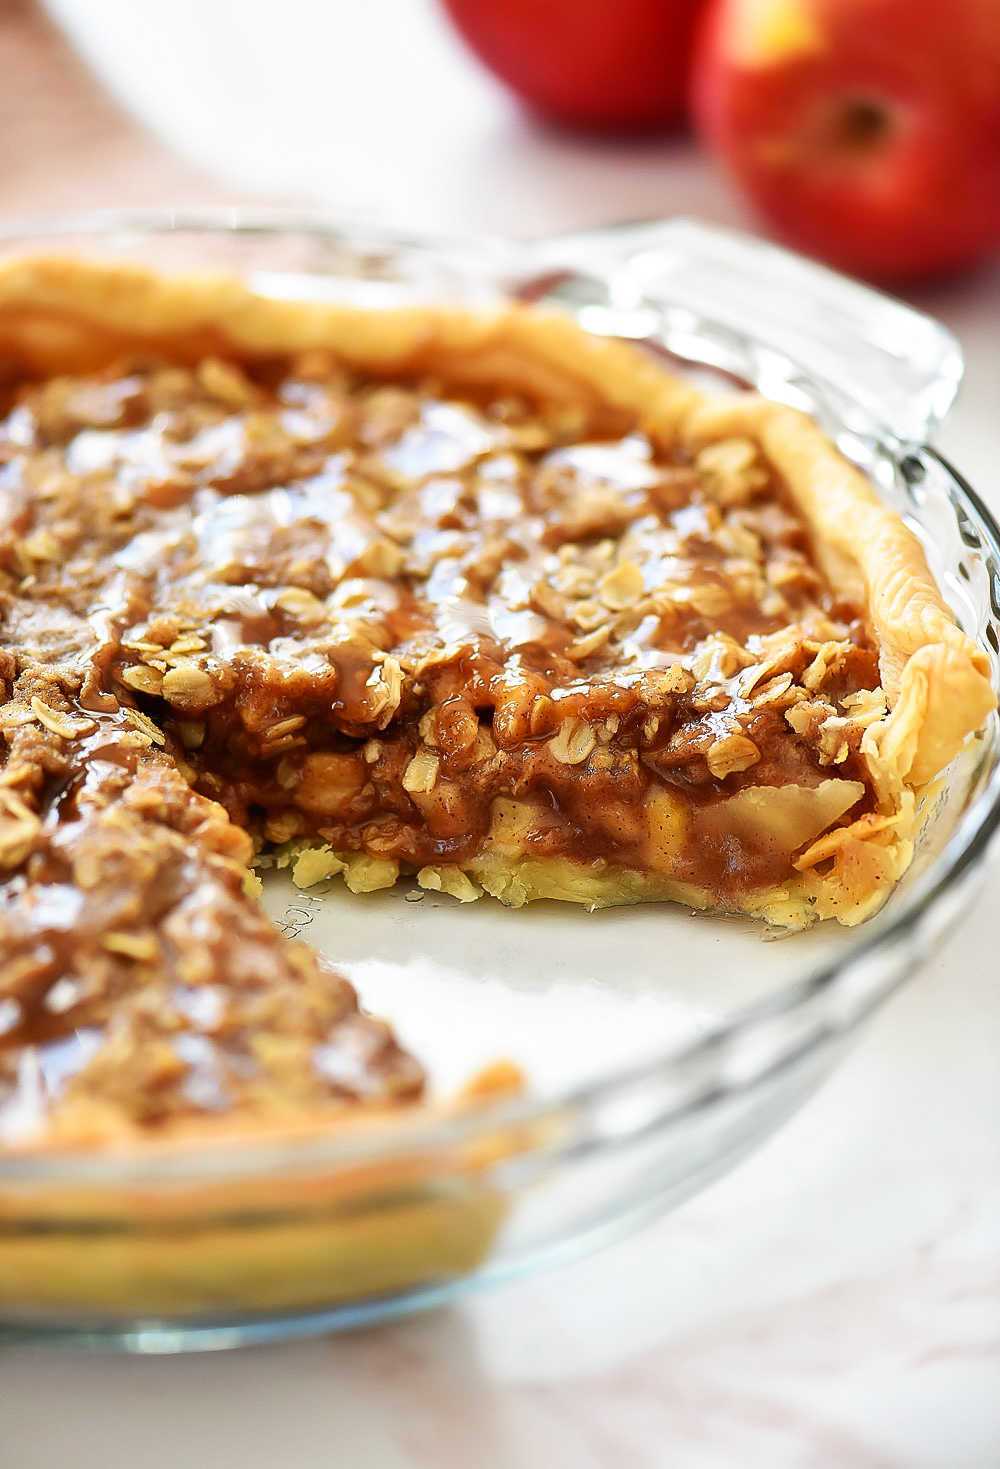 Deep Dish Apple Crisp is a thick layer of apples, cinnamon and sugary oats baked over a flaky pie crust. Life-in-the-Lofthouse.com